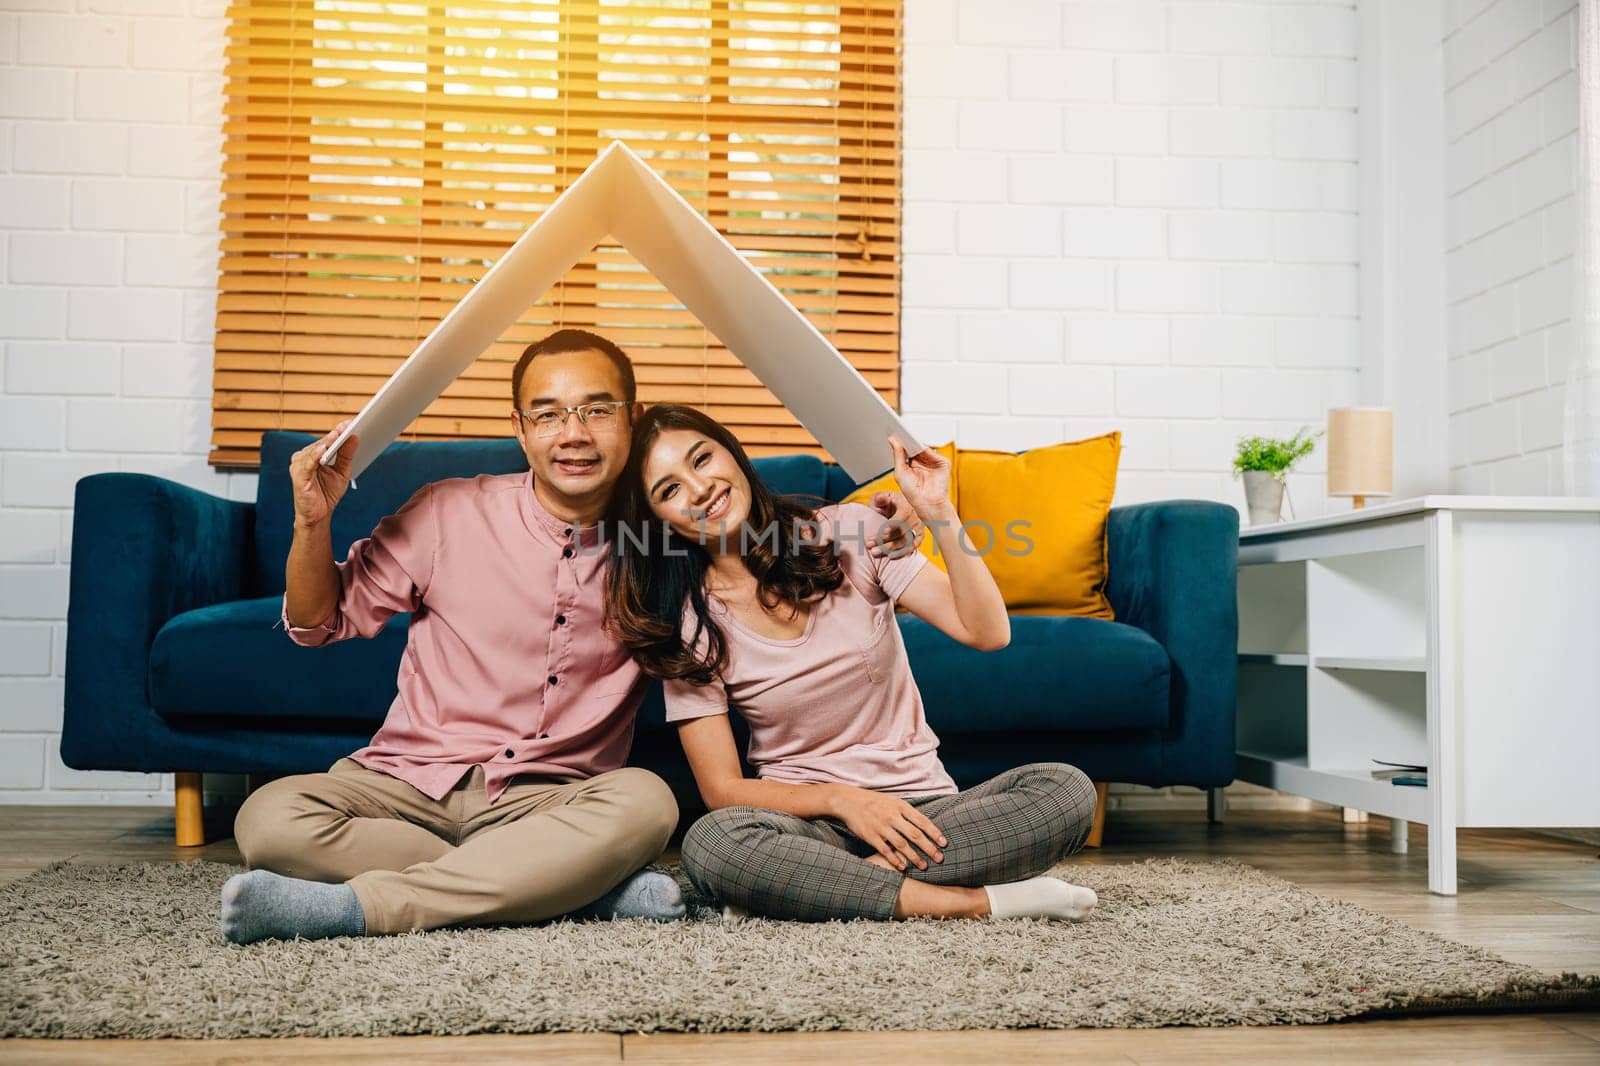 In their new empty apartment Asian husband and wife create cardboard roof celebrating their achievement and happiness. Full-length portrait against white studio wall showing their security and bonding